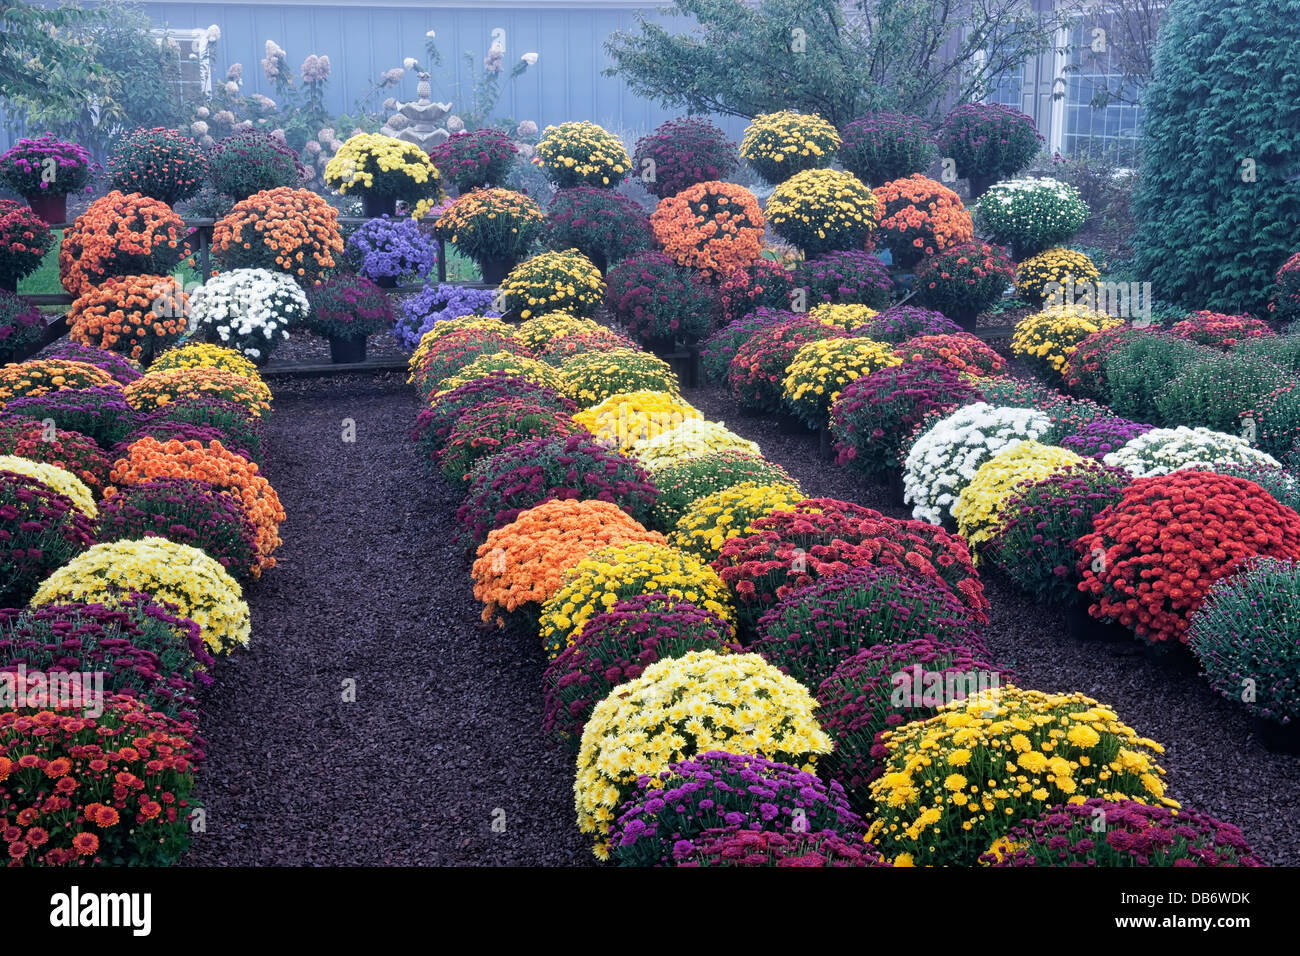 Foggy autumn morning enriches the mum display at this outdoor garden center in Lewisburg, Pennsylvania. Stock Photo